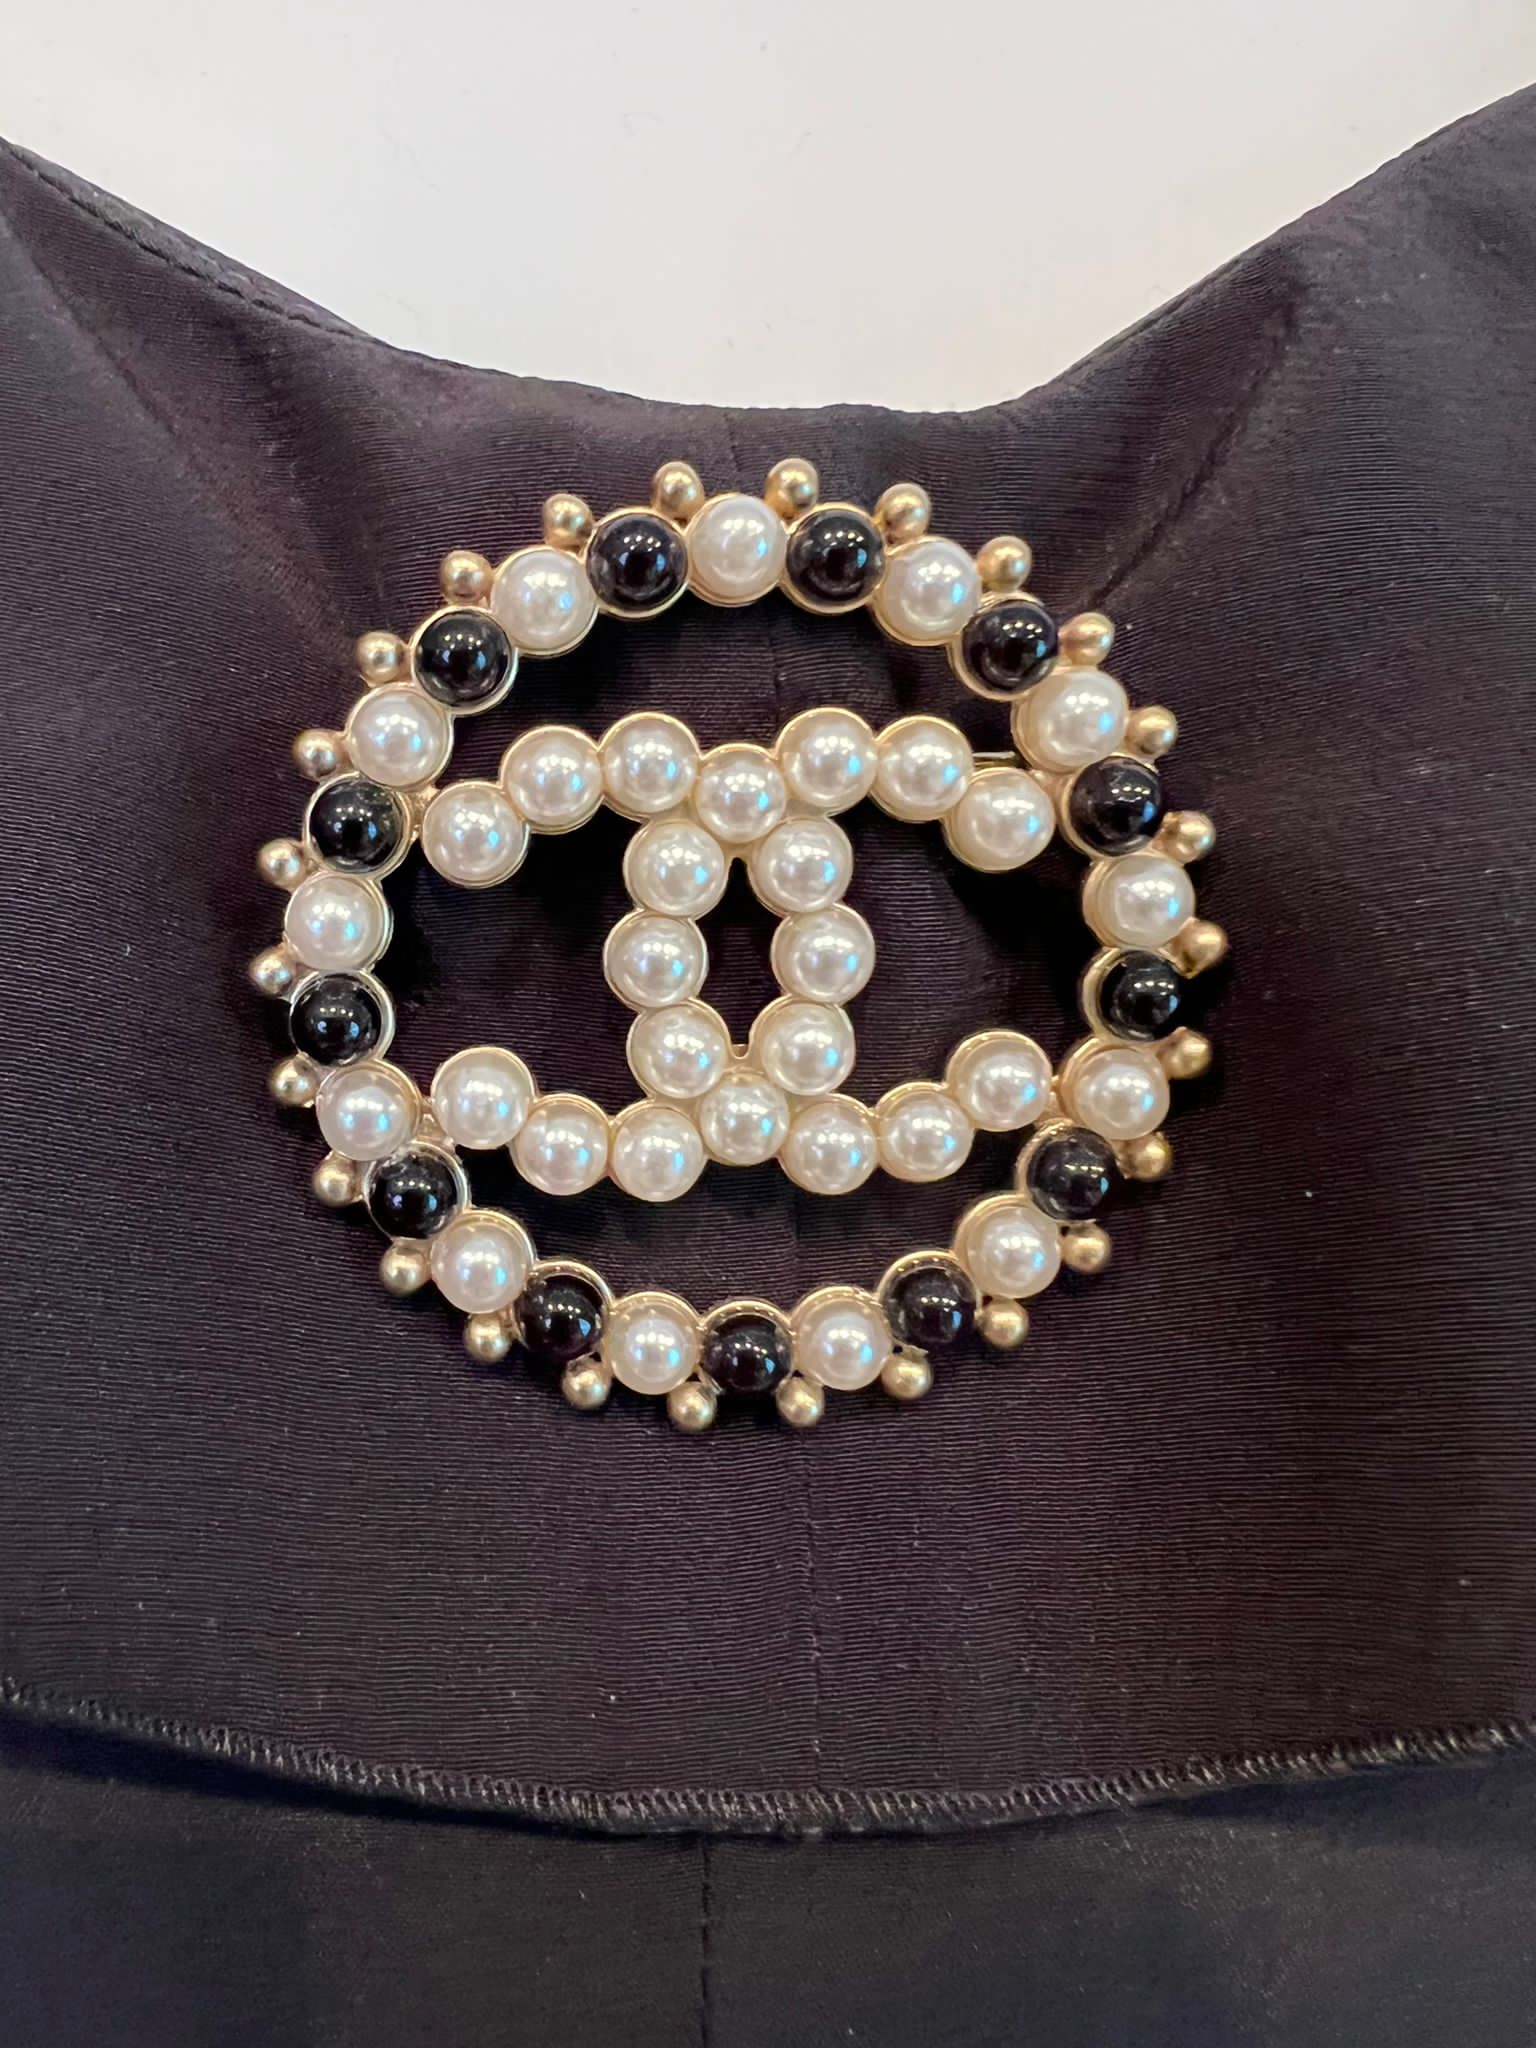 Chanel Gold Tone Faux Pearl CC Pin Brooch Chanel